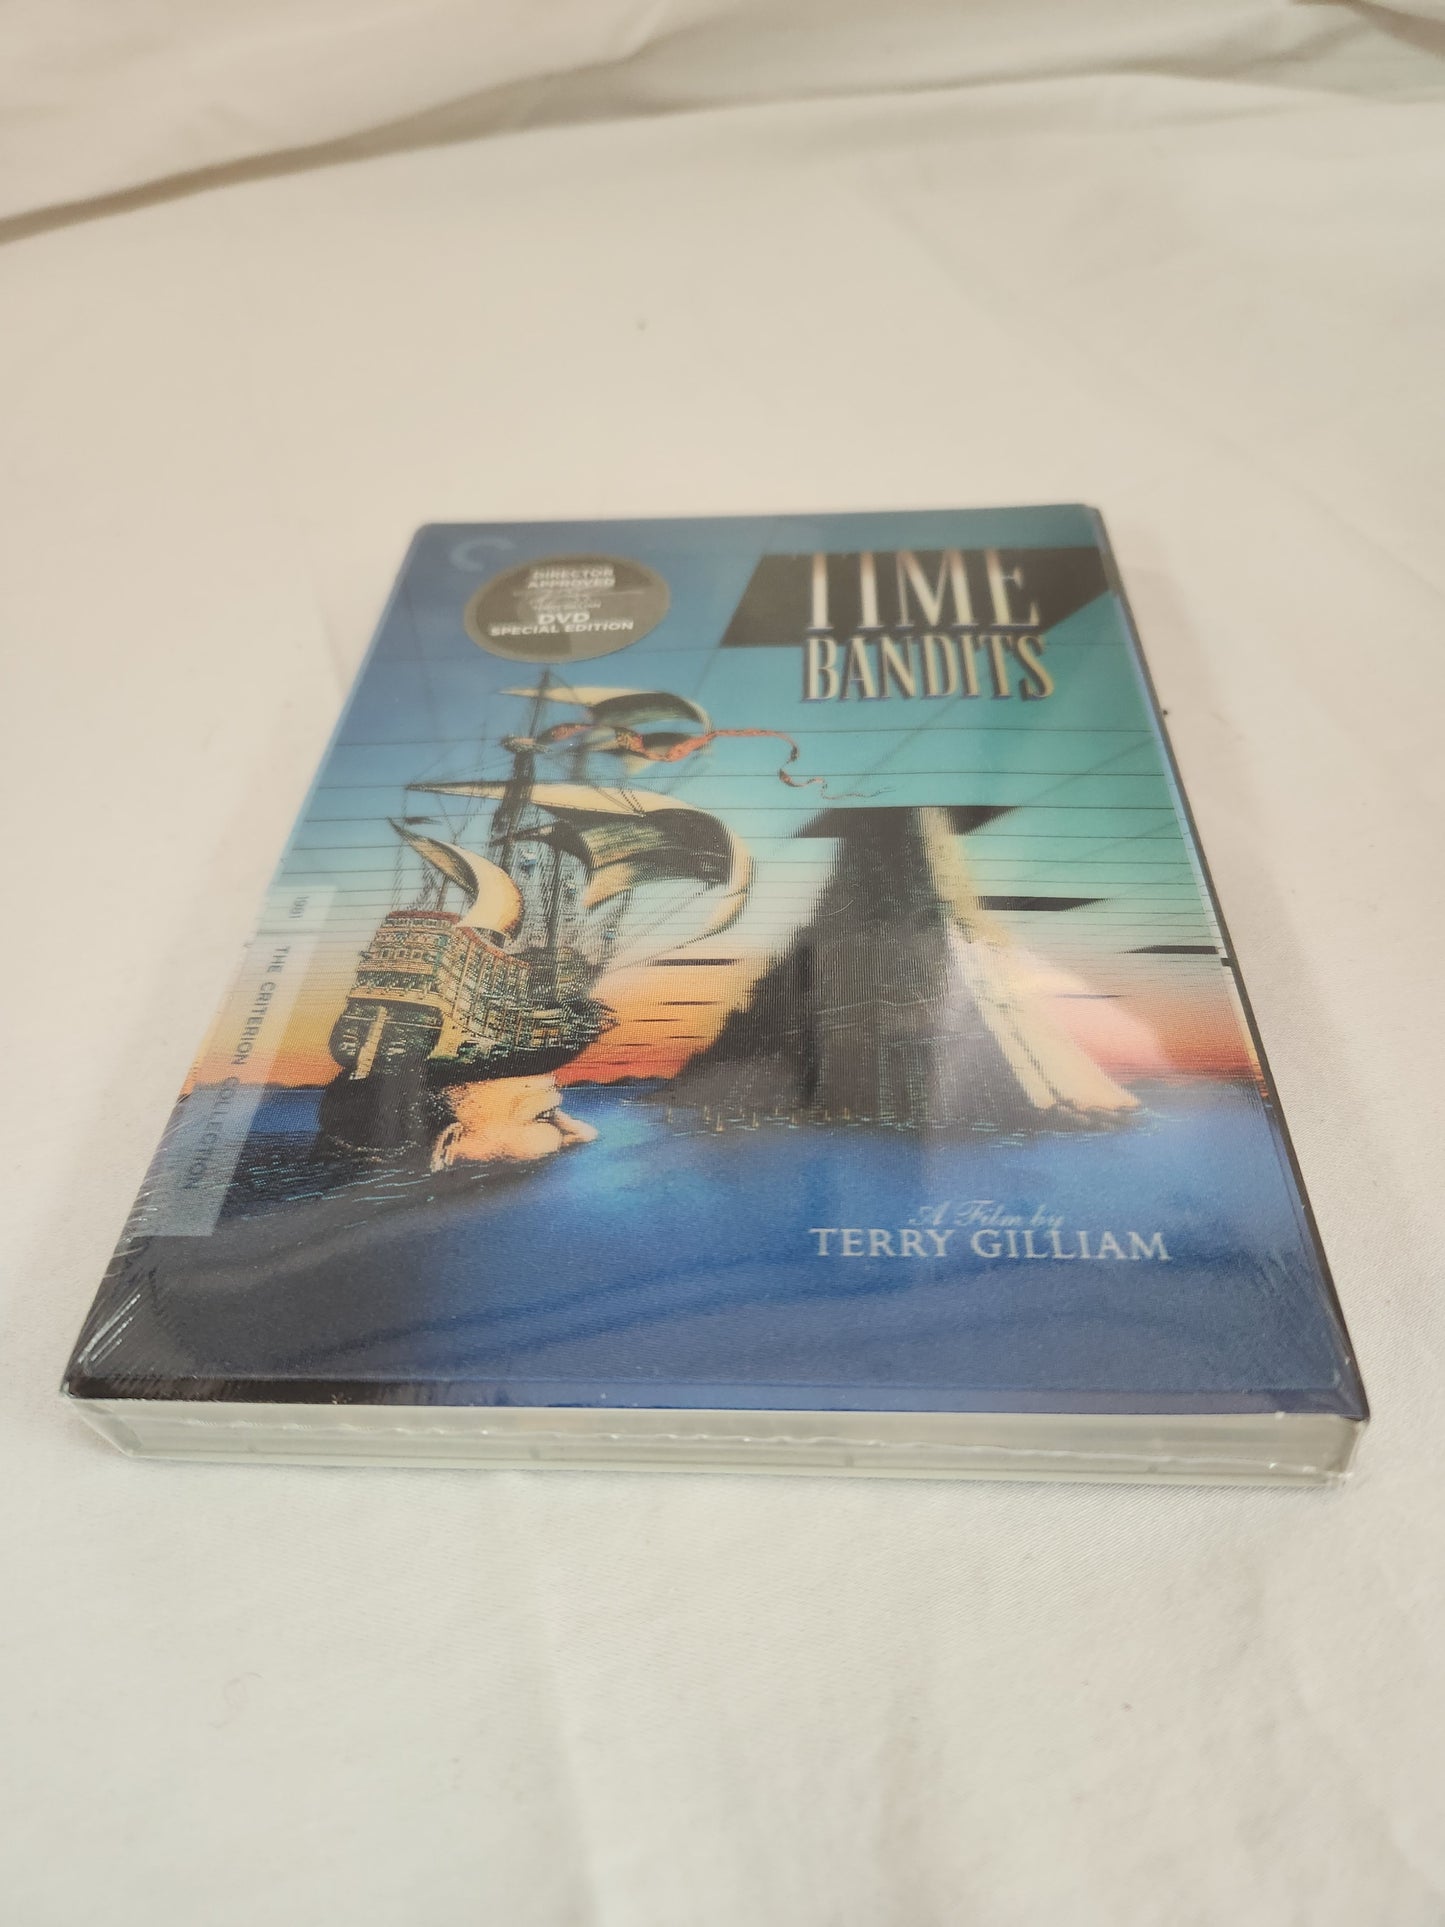 Time Bandits - 1981 The Criterion Collection DVD (Sealed)